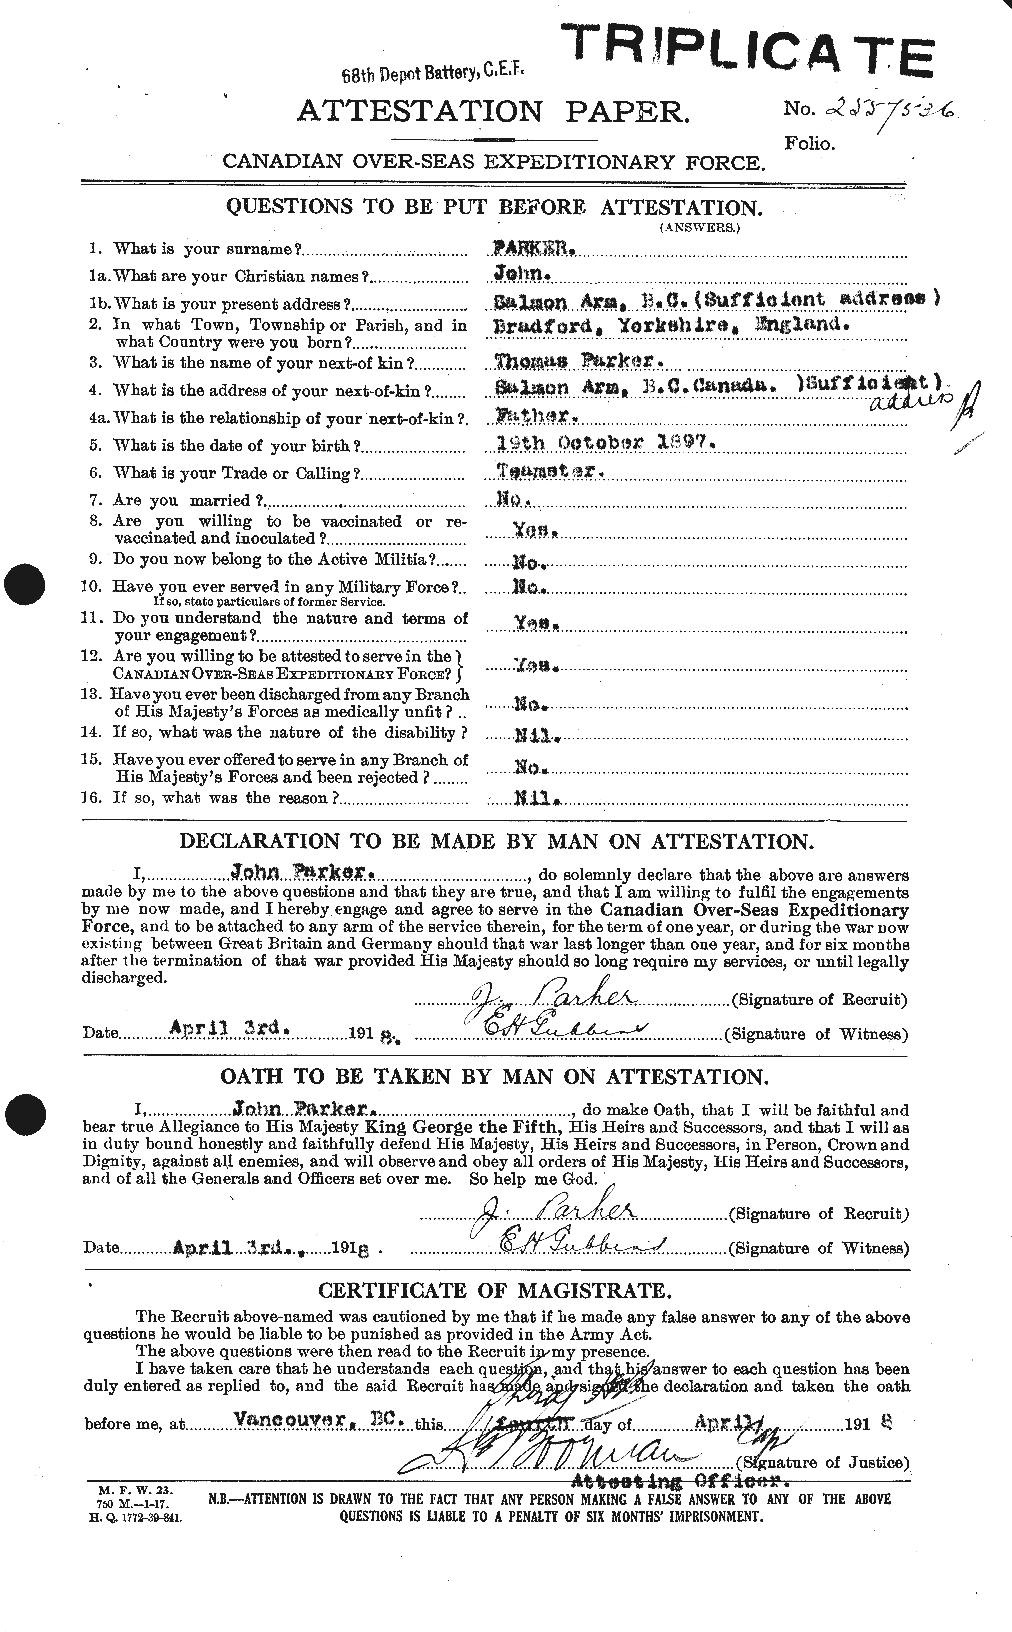 Personnel Records of the First World War - CEF 565454a